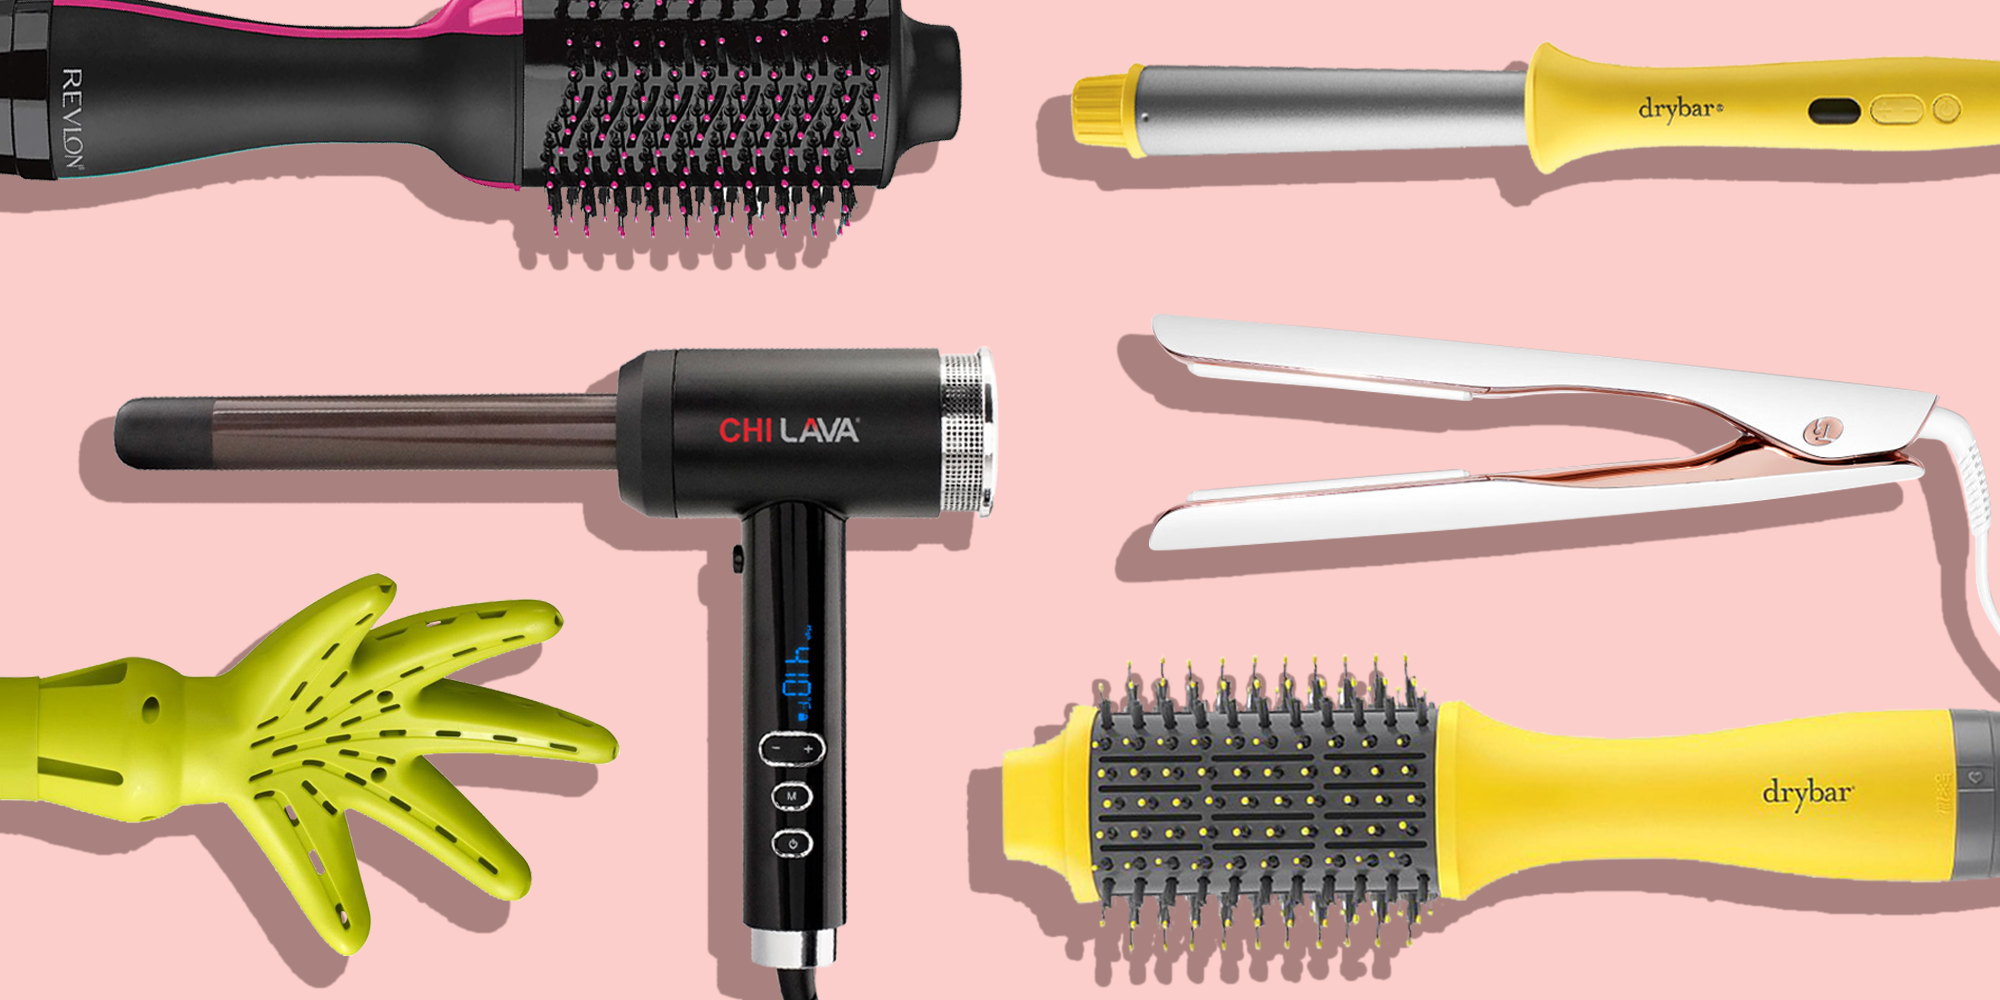 Hairstyling Tools and Reviews - Top Flat Irons, Curling Irons, and Tools